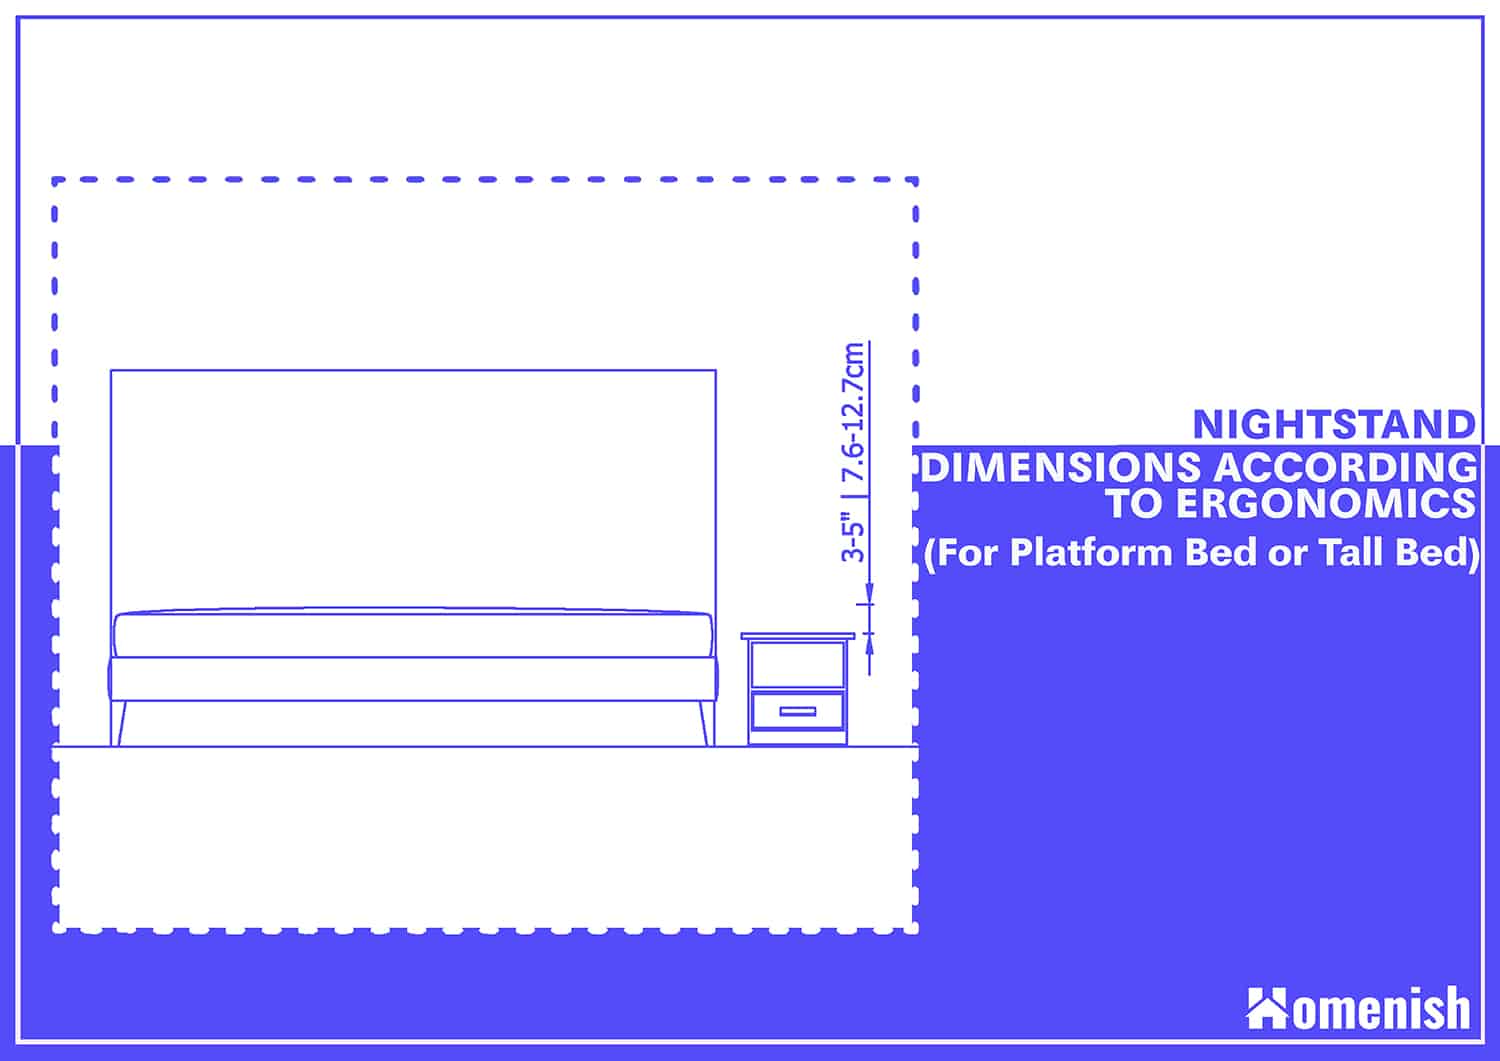 Nightstand dimensions according to ergonomics for platform or tall beds